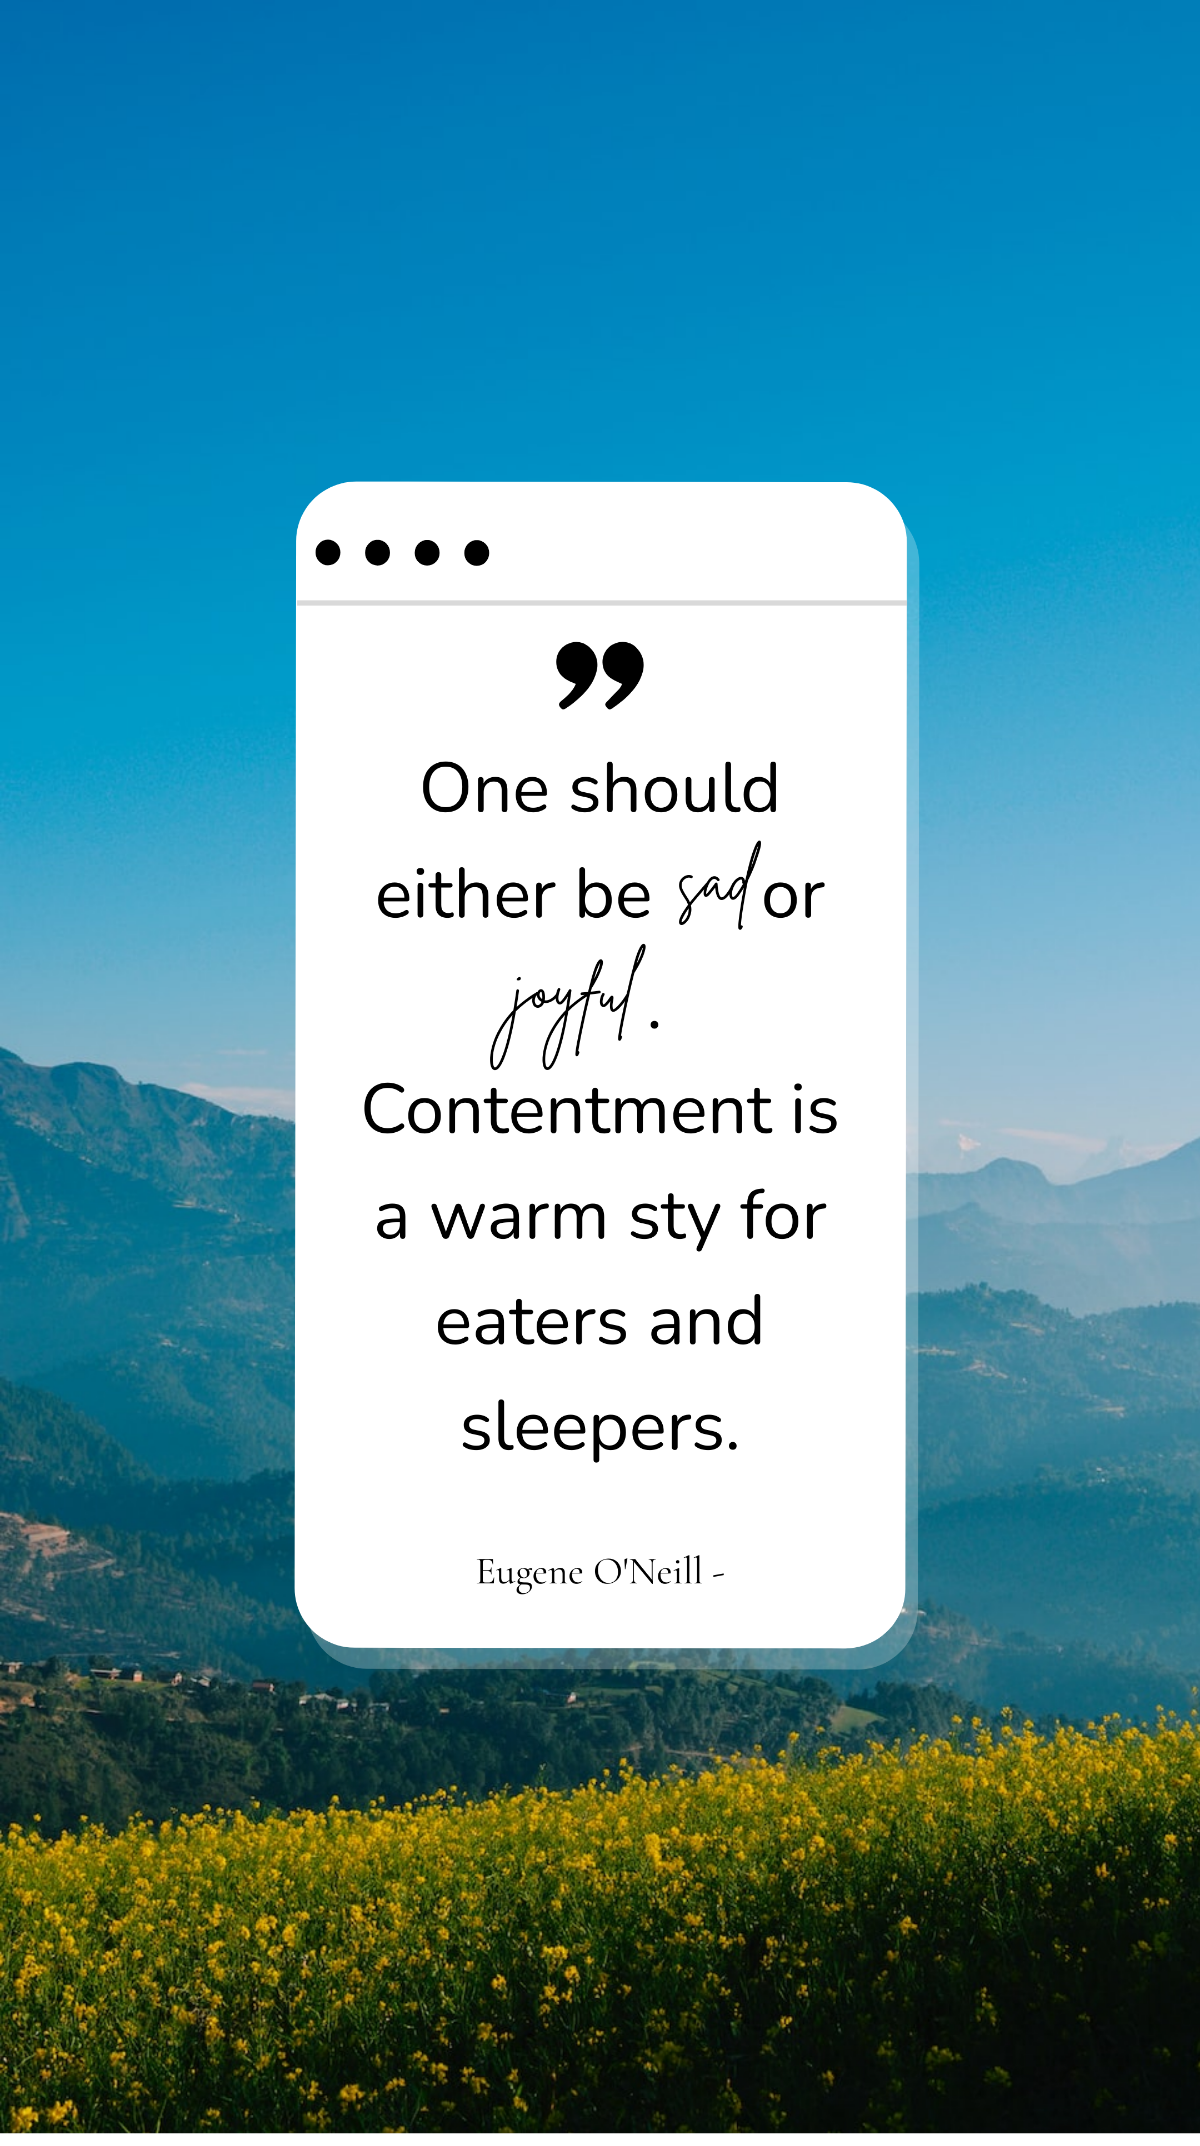 Eugene O'Neill - One should either be sad or joyful. Contentment is a warm sty for eaters and sleepers. Template